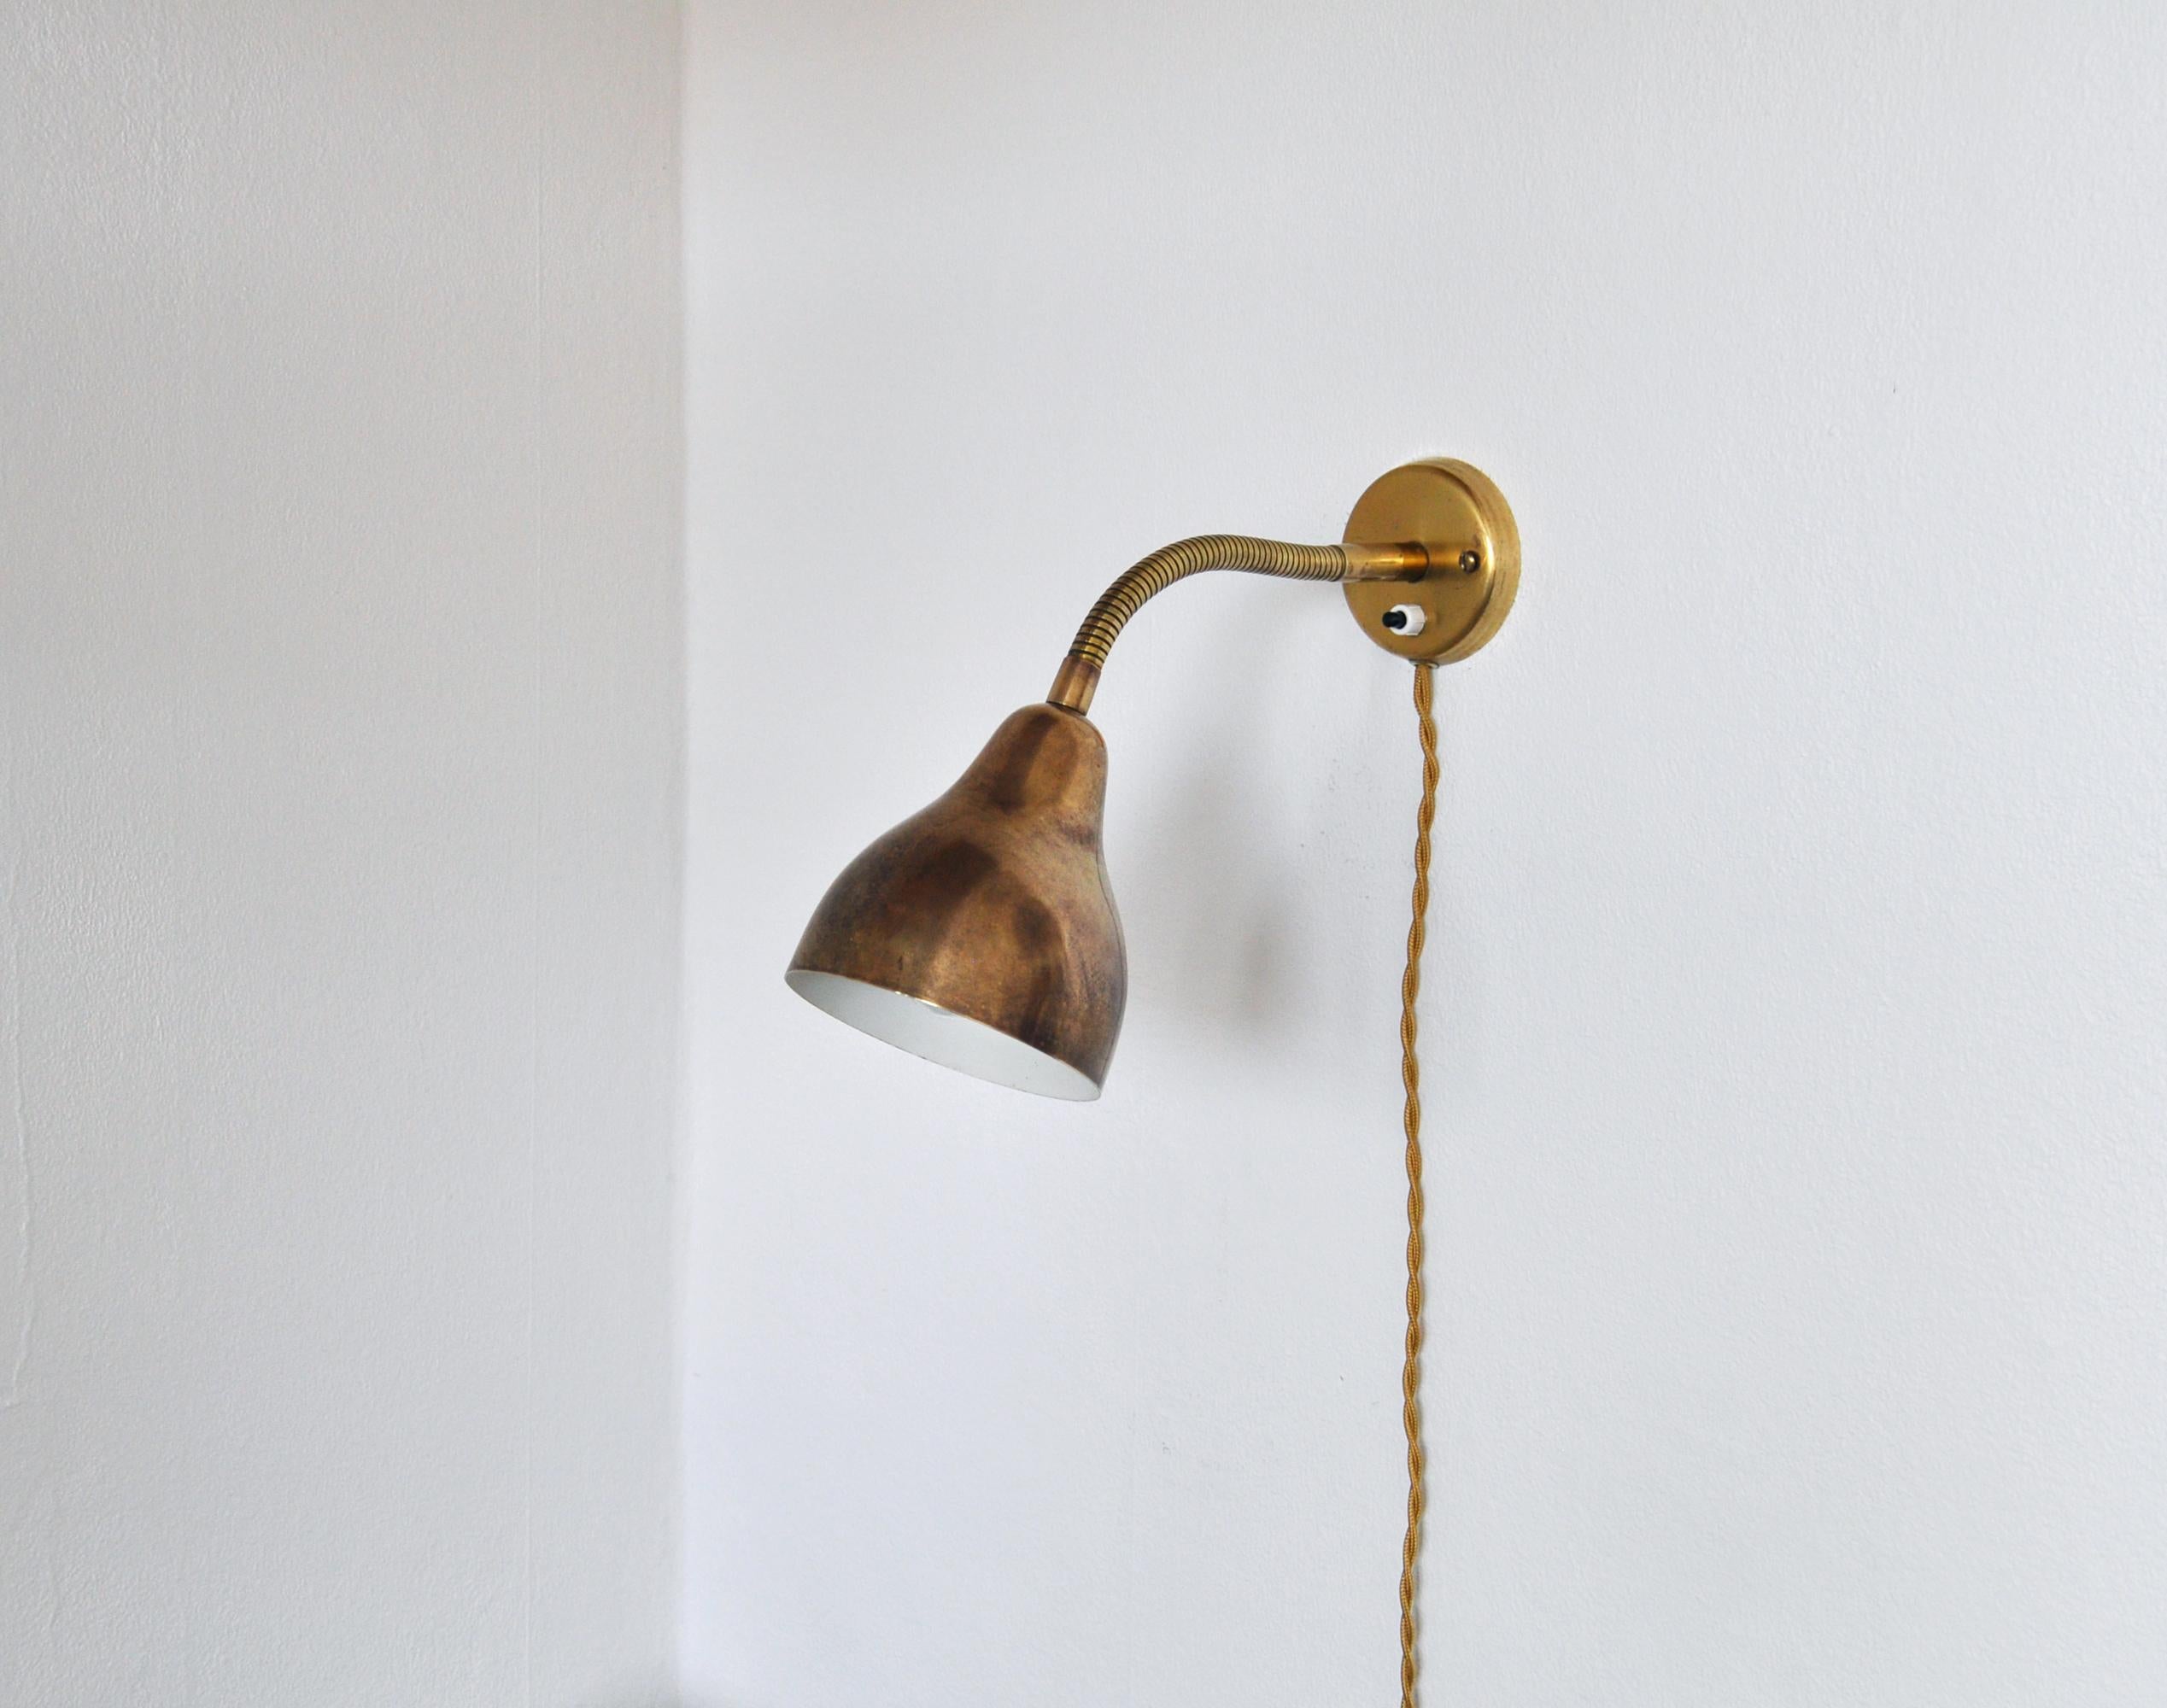 Scandinavian Modern Danish wall lamp with adjustable brass arm in the style of Vilhelm Lauritzen, 1960s
Patinated brass, inner shade white with signs of wear. Rewired.